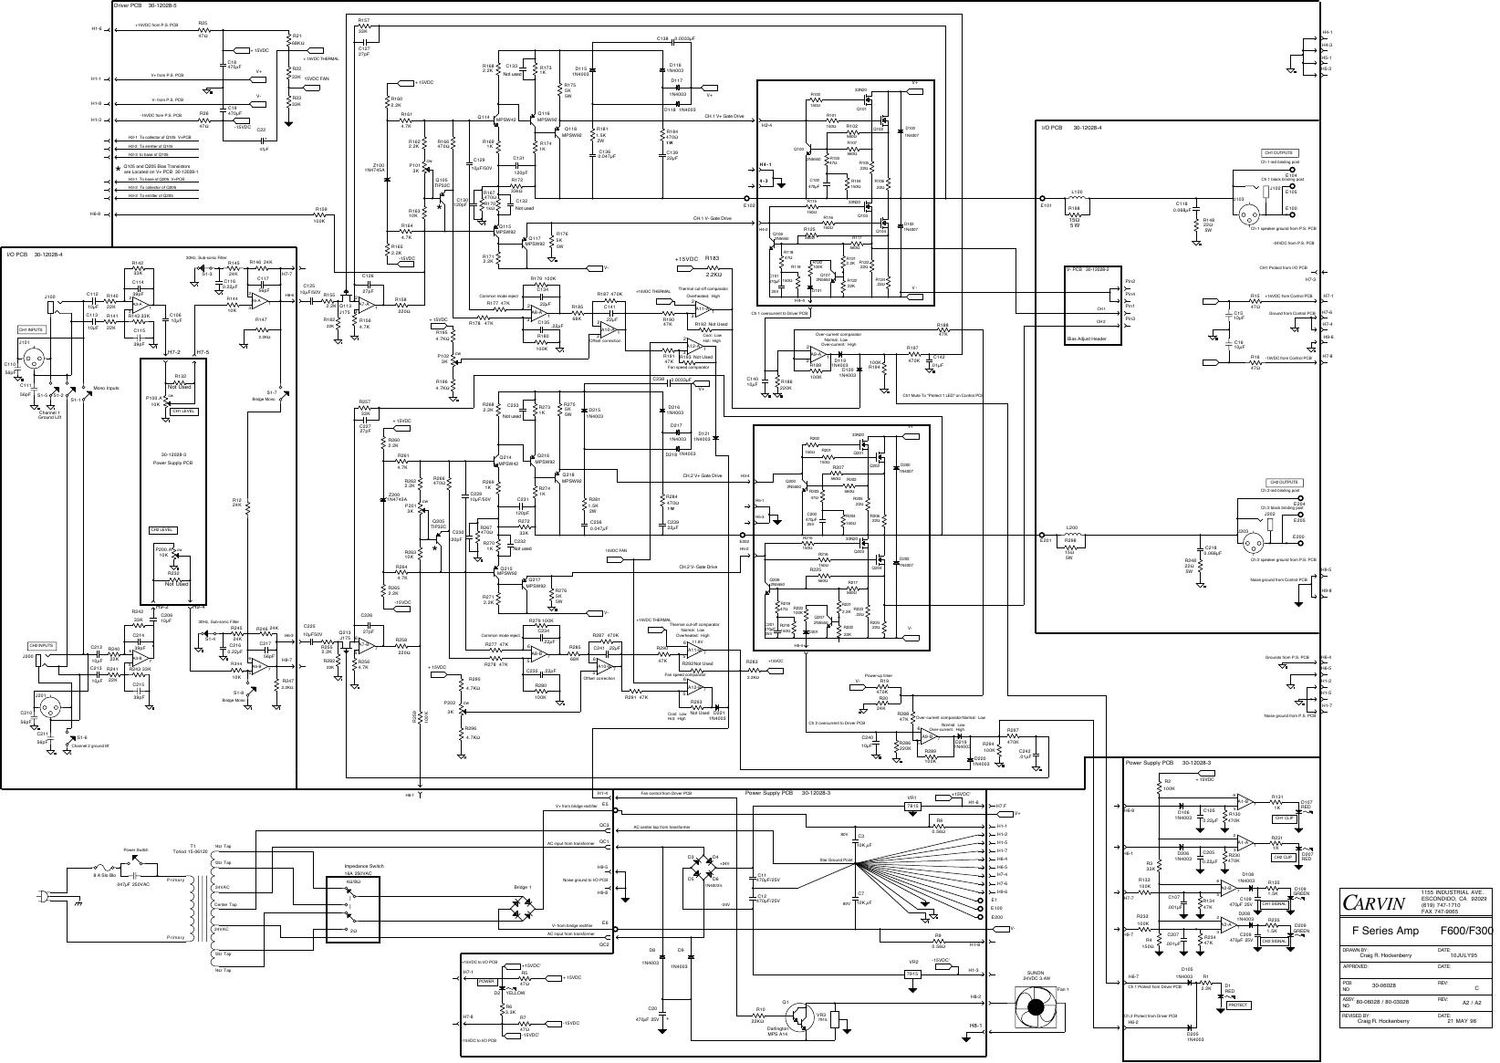 carvin f 300 f 600 power amp rev c schematic